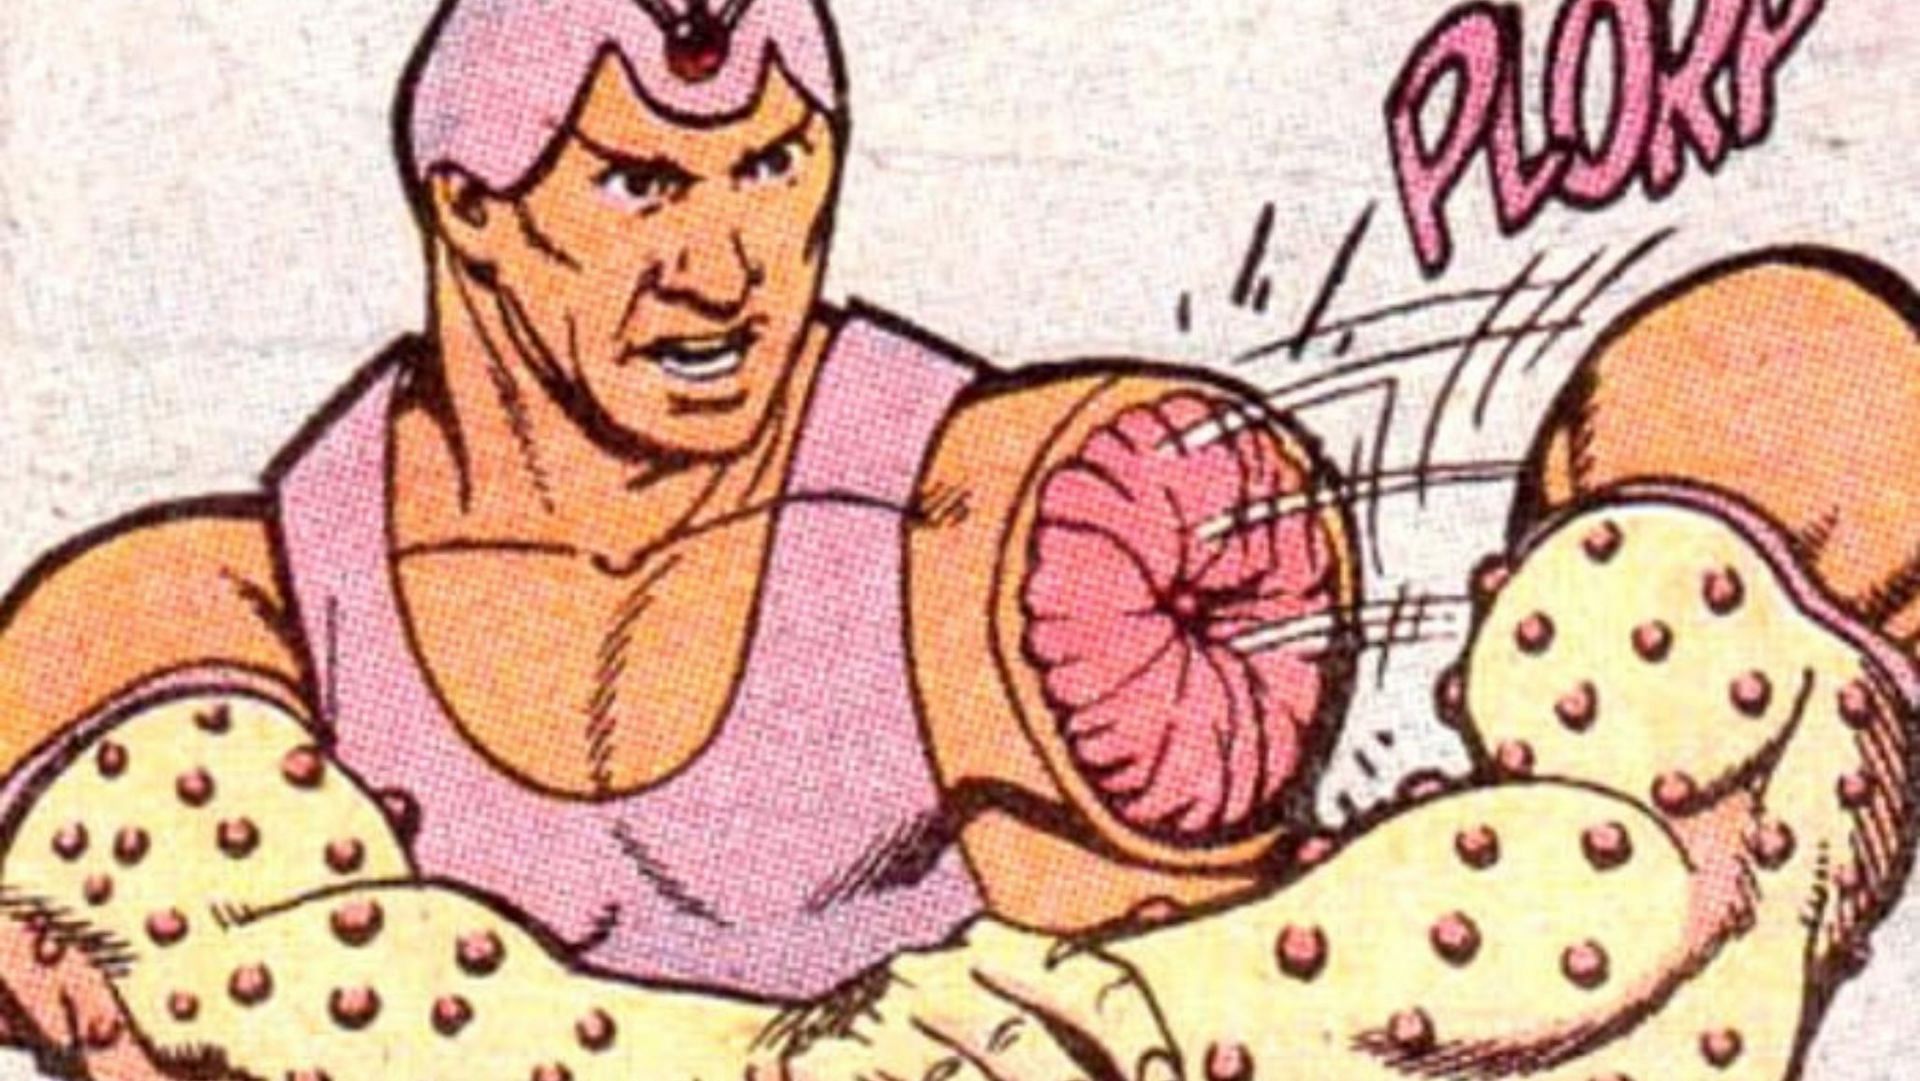 Floyd Belkin, also known as Arm-Fall-Off-Boy, puts his power to the test as he detaches his own limb to use as a weapon (Image via DC Comics)